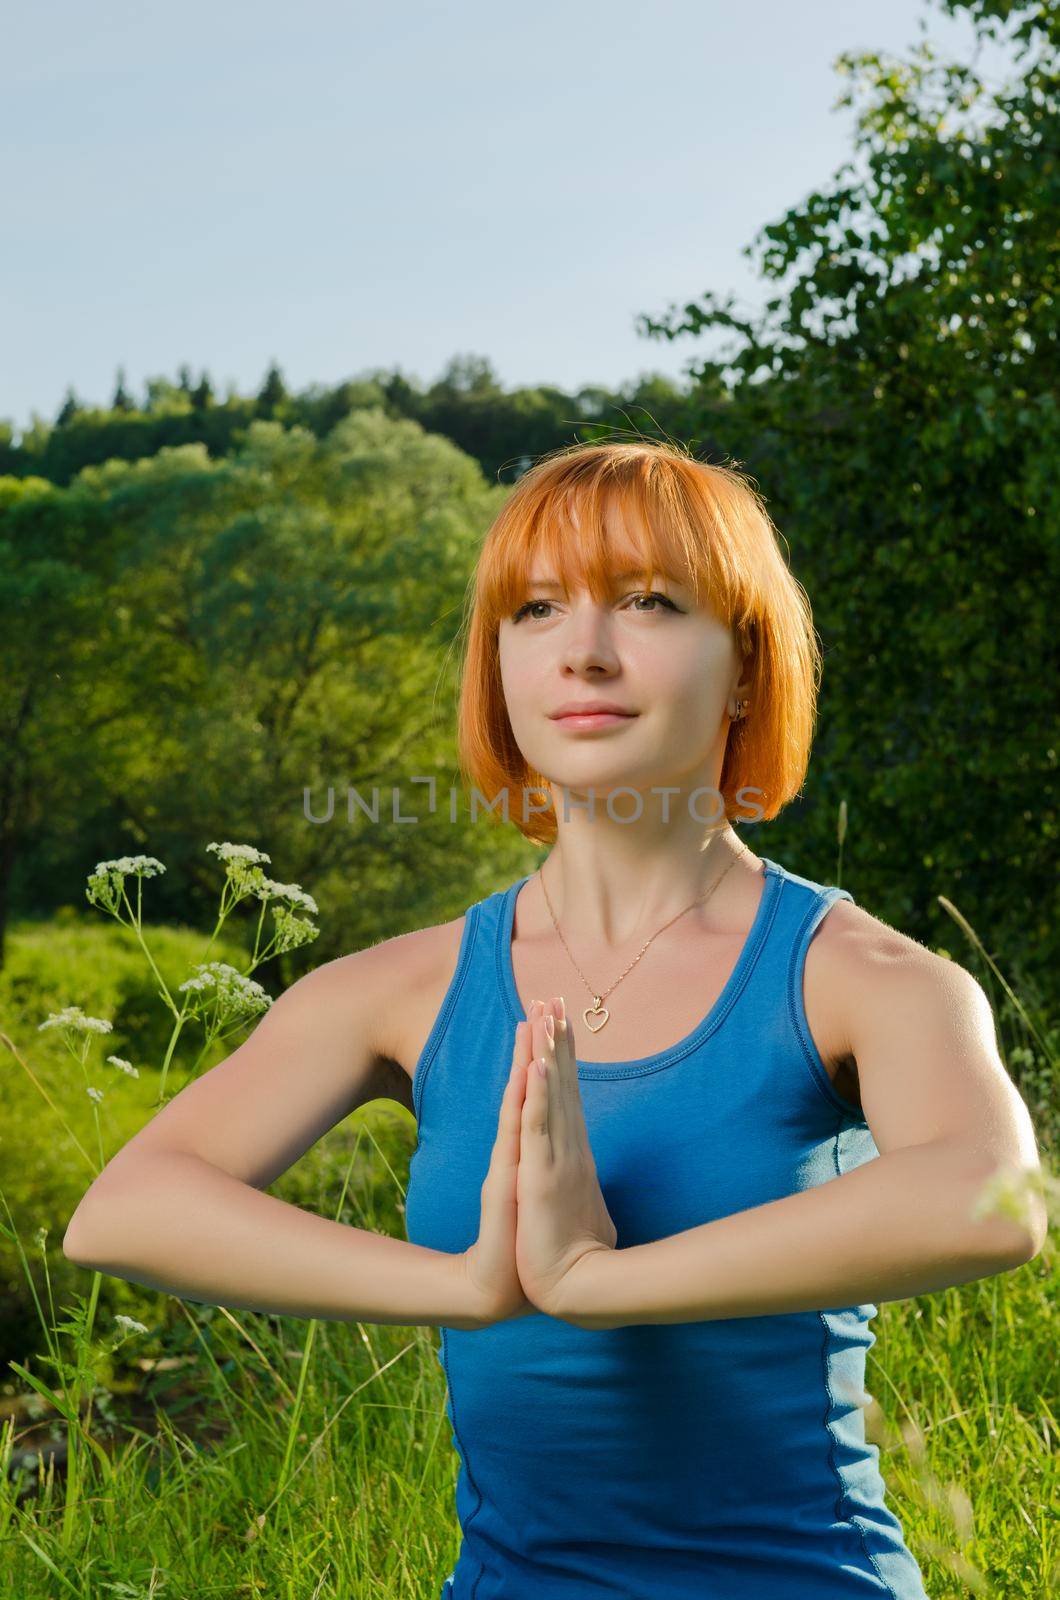 Beautiful red haired woman practicing fitness yoga outdoors on a summer day